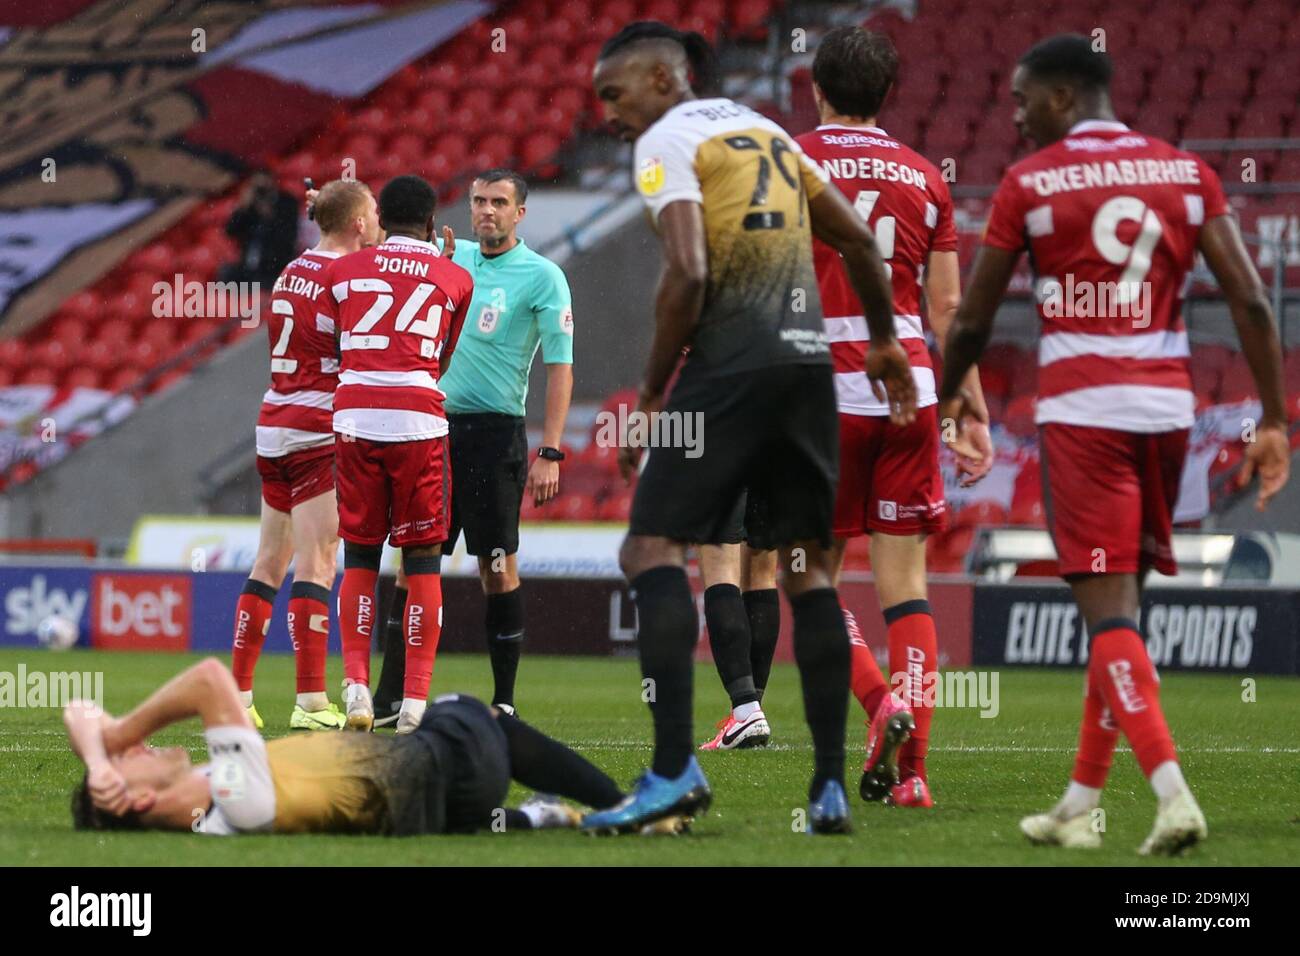 Cameron John (24) of Doncaster Rovers and Brad Halliday (2) of Doncaster Rovers are seen unhappy with the referees decision Stock Photo